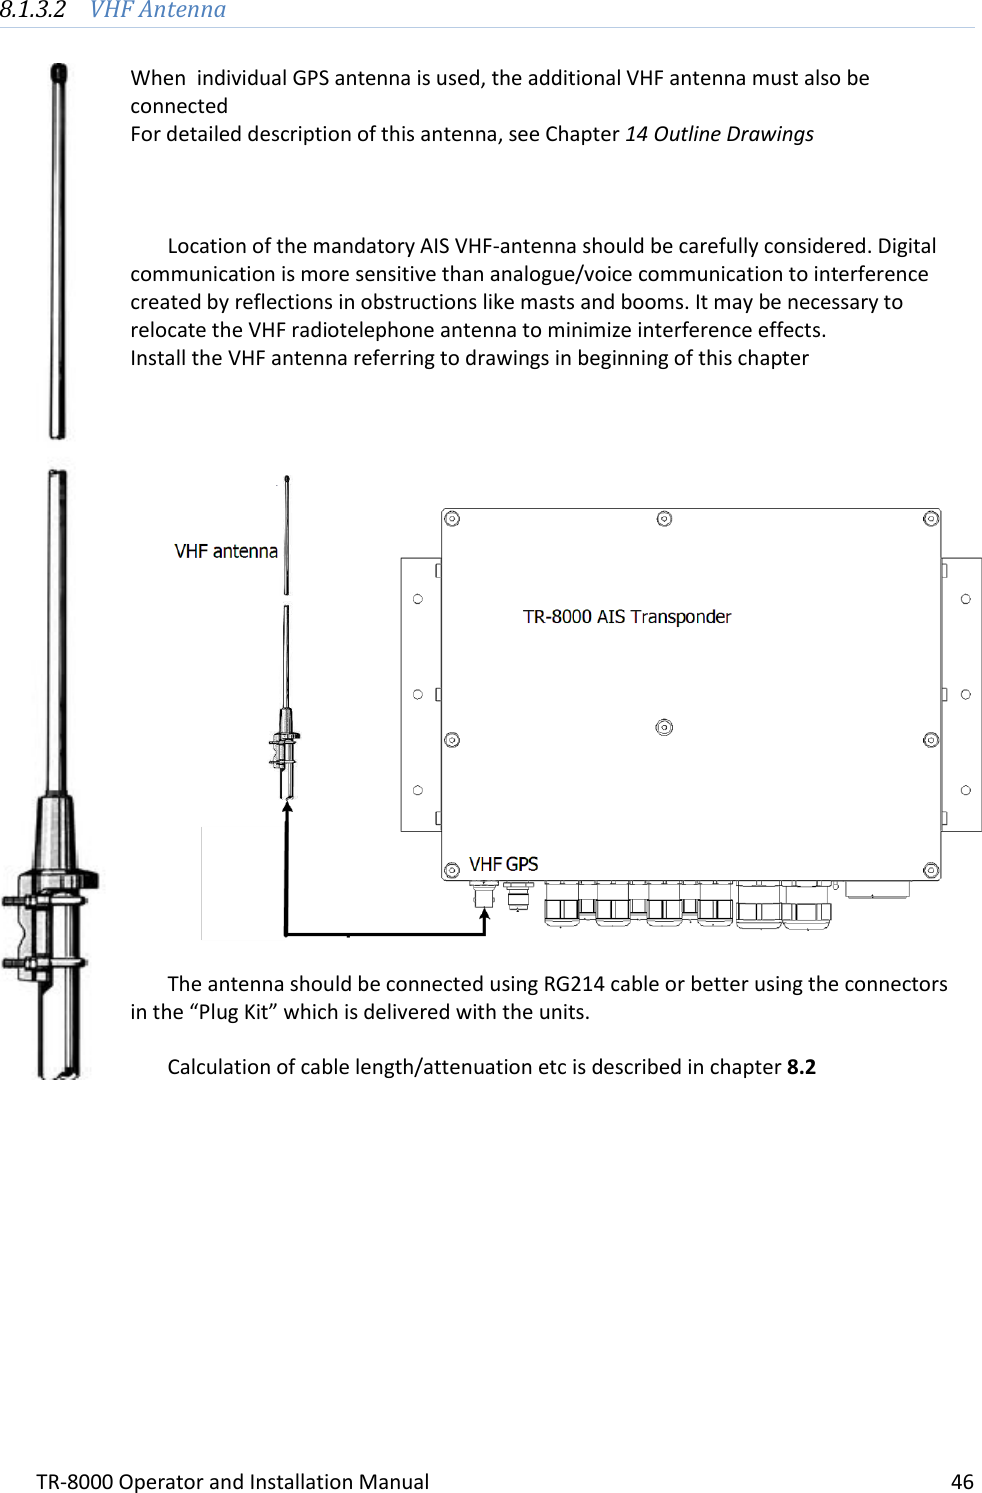 TR-8000 Operator and Installation Manual    46  8.1.3.2 VHF Antenna  When  individual GPS antenna is used, the additional VHF antenna must also be connected For detailed description of this antenna, see Chapter 14 Outline Drawings    Location of the mandatory AIS VHF-antenna should be carefully considered. Digital communication is more sensitive than analogue/voice communication to interference created by reflections in obstructions like masts and booms. It may be necessary to relocate the VHF radiotelephone antenna to minimize interference effects. Install the VHF antenna referring to drawings in beginning of this chapter      The antenna should be connected using RG214 cable or better using the connectors  in the “Plug Kit” which is delivered with the units.  Calculation of cable length/attenuation etc is described in chapter 8.2         